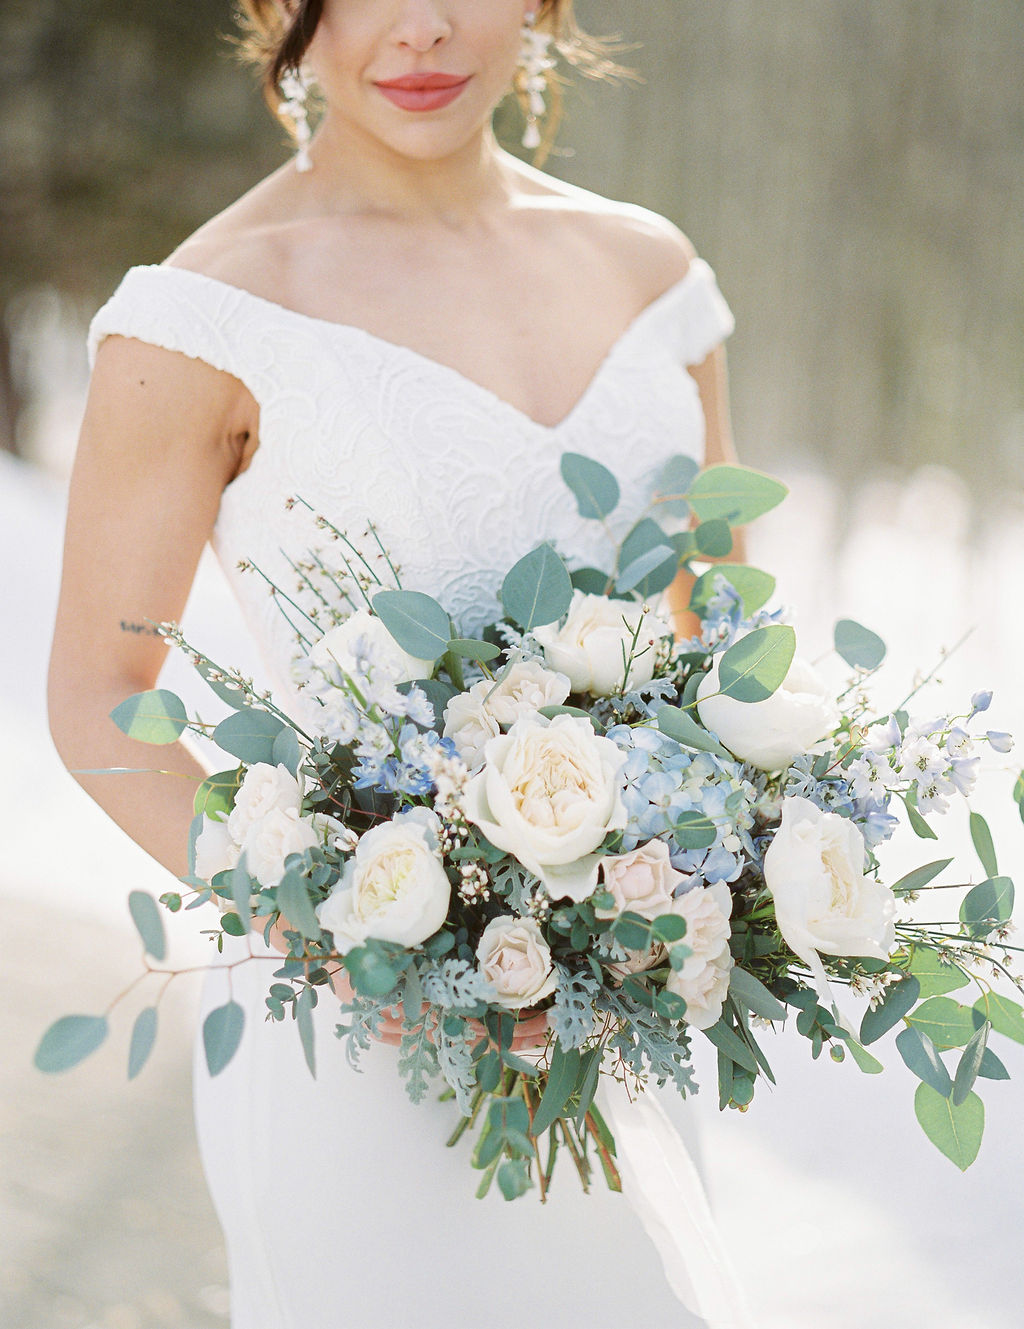 Classic bride with bold lipstick and chandelier earrings in an off the shoulder gown with a sweetheart neckline holding a light blue and white bouquet